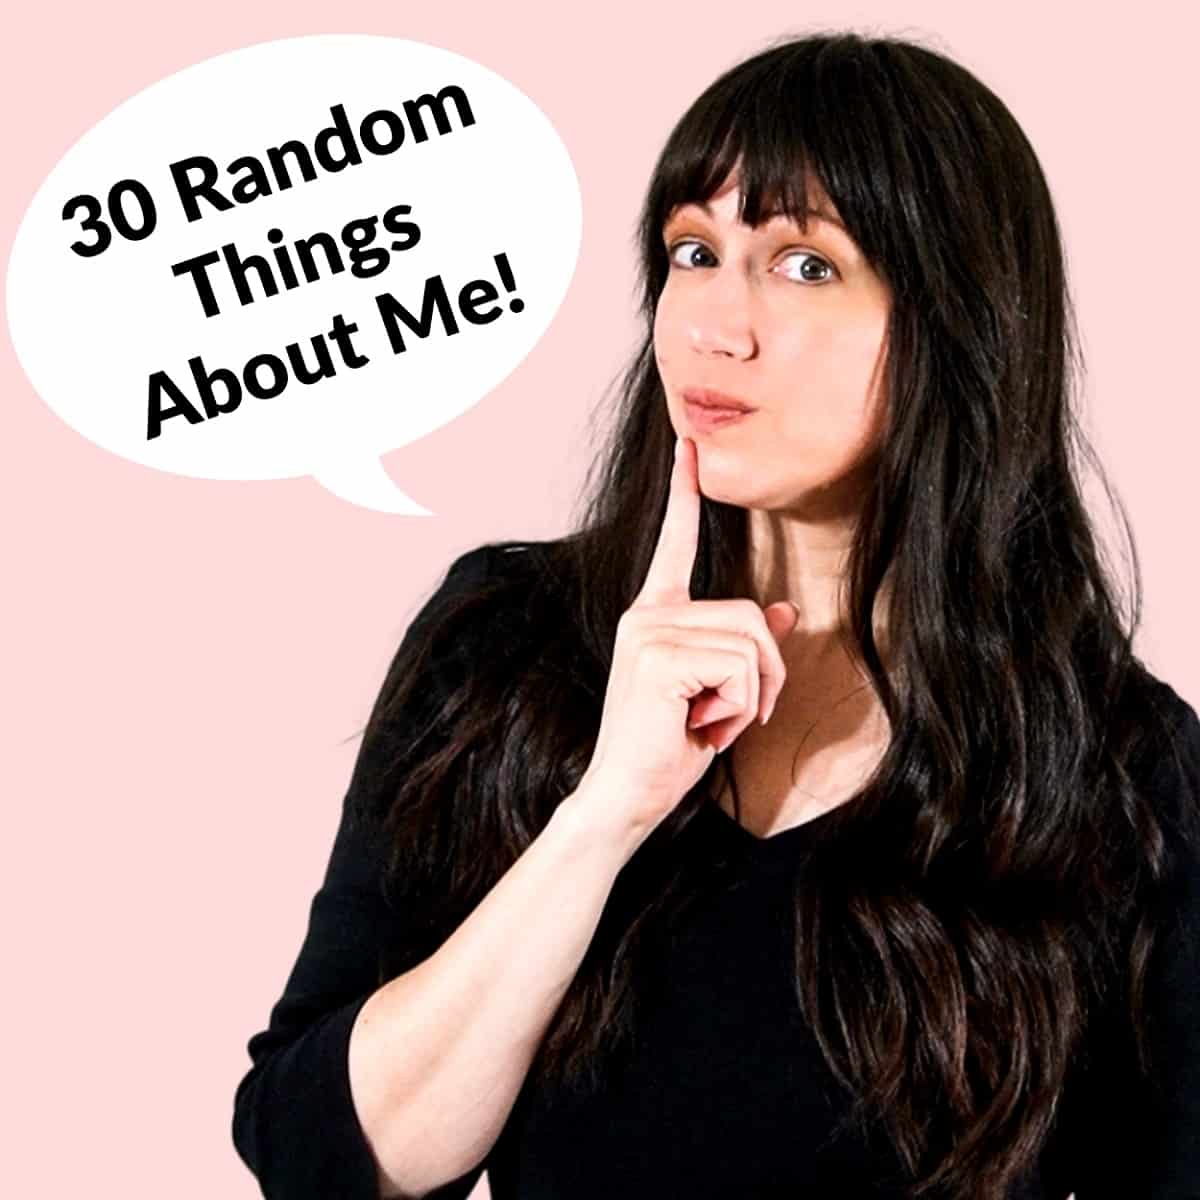 Graphic with Kara that says 30 random things about me.